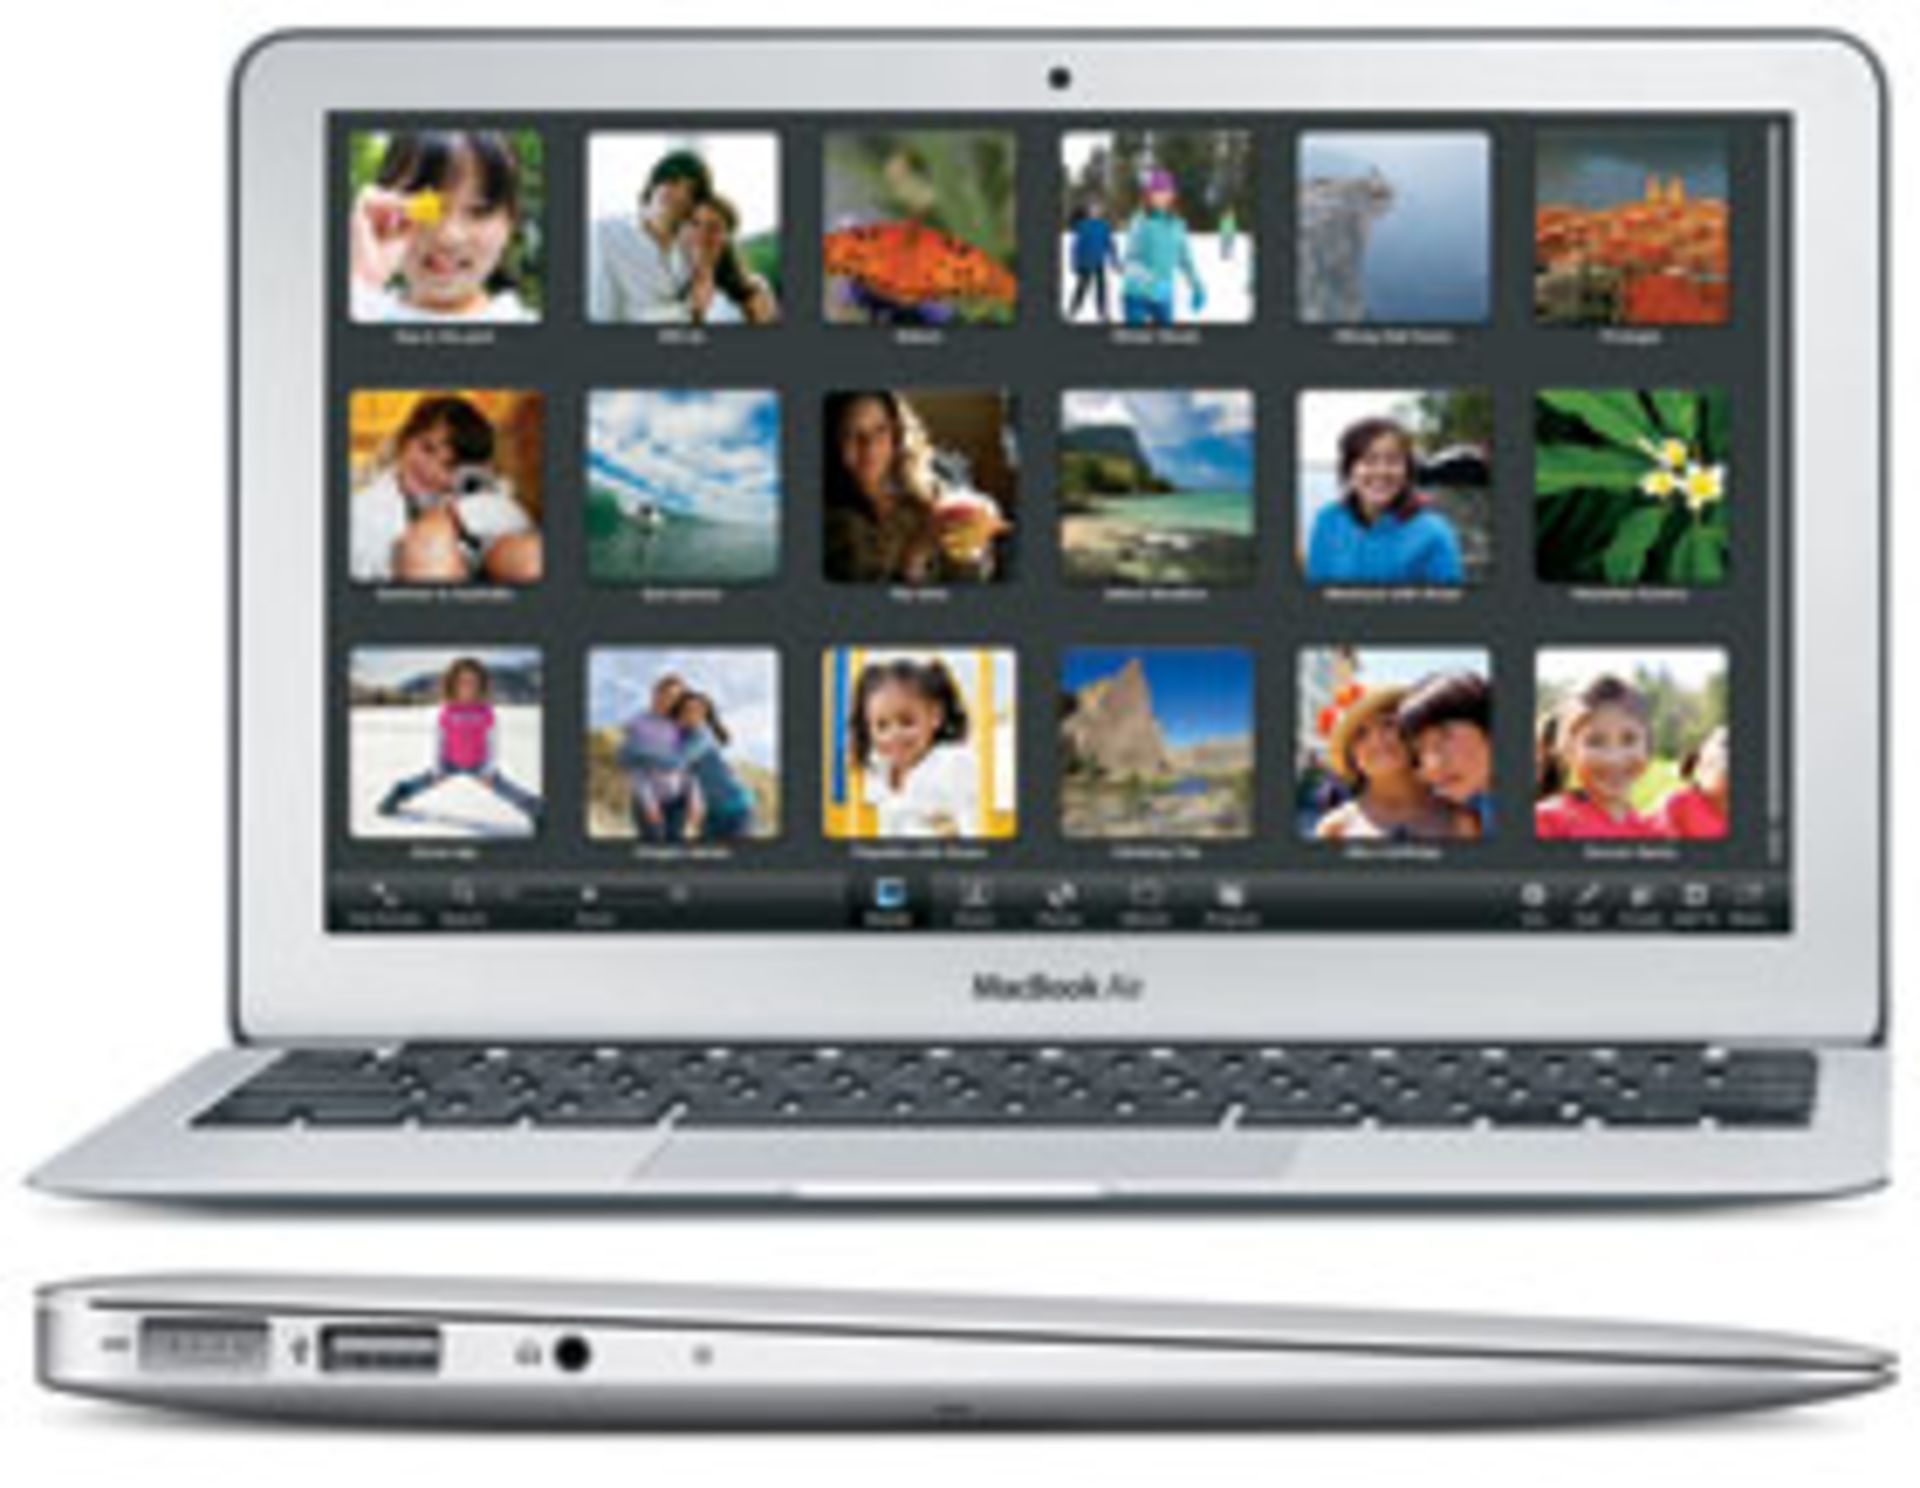 + VAT Grade B Macbook Air 11.6 Inch Core 2 Duo - 64GB SSD - A1370 - Available Approx 7 Working Days